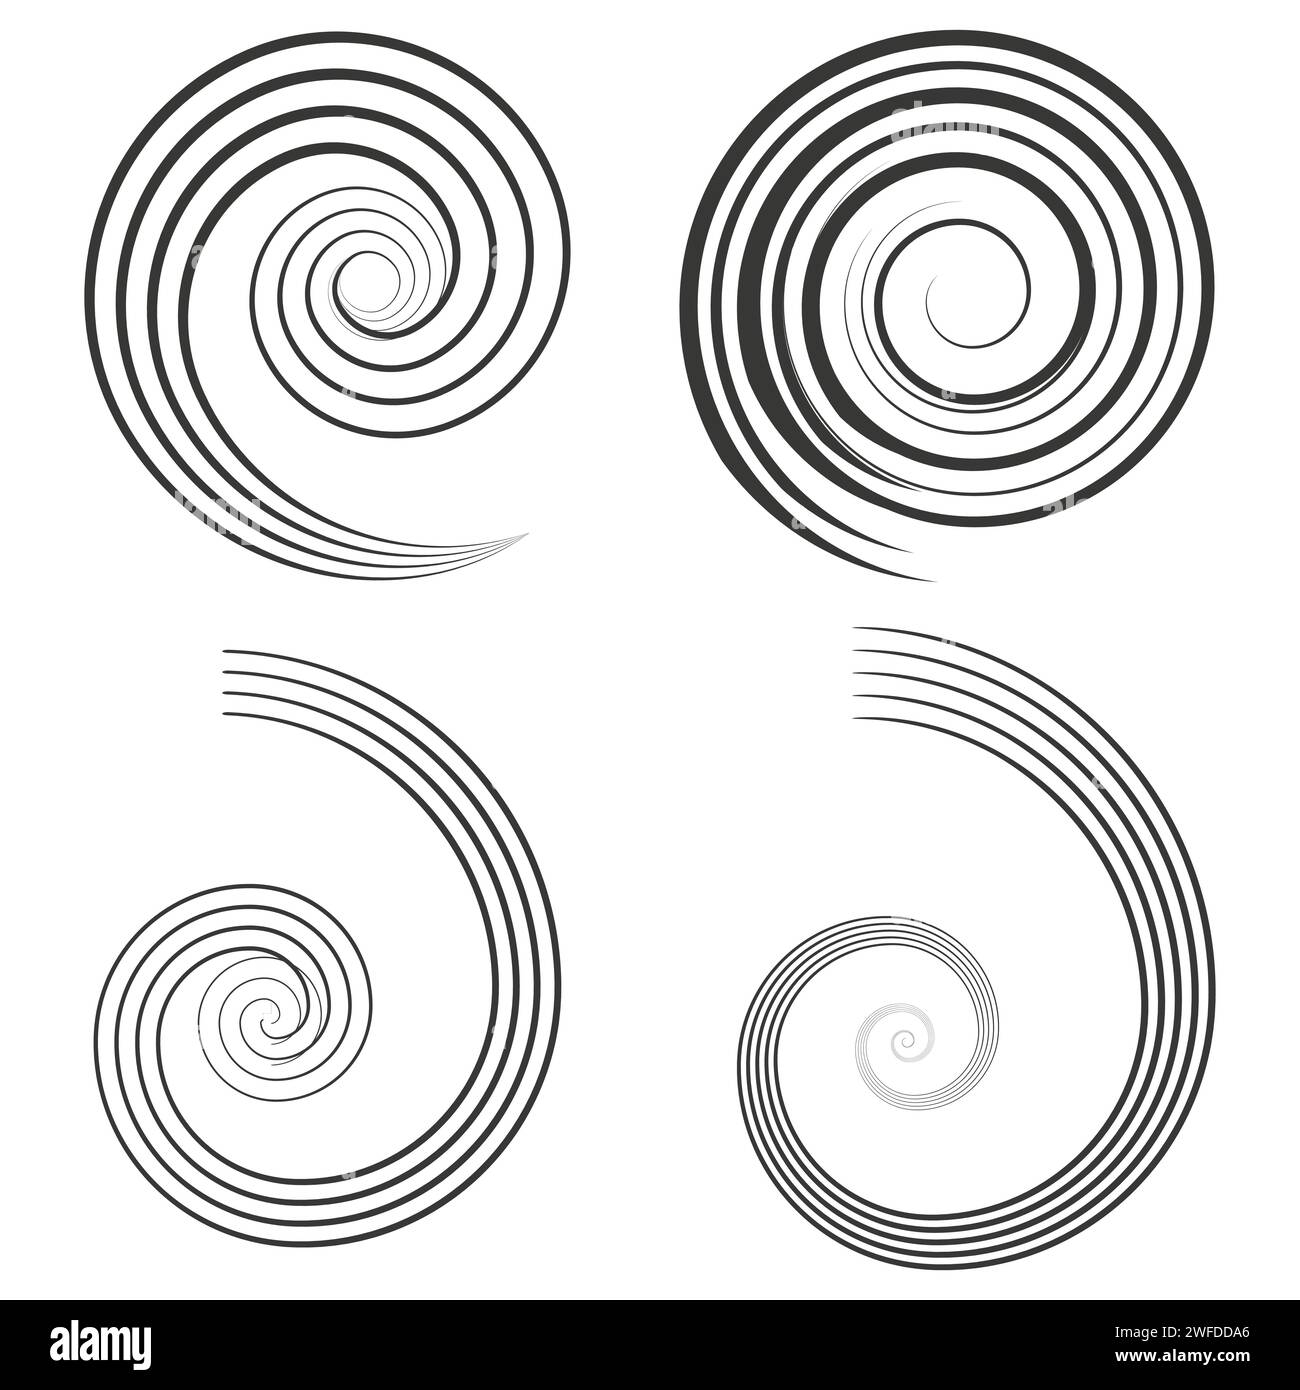 Spiral, swirl, twirl. Volute, helix, eddy and vortex shape. Radial lines with rotation. Vector illustration. Stock Vector